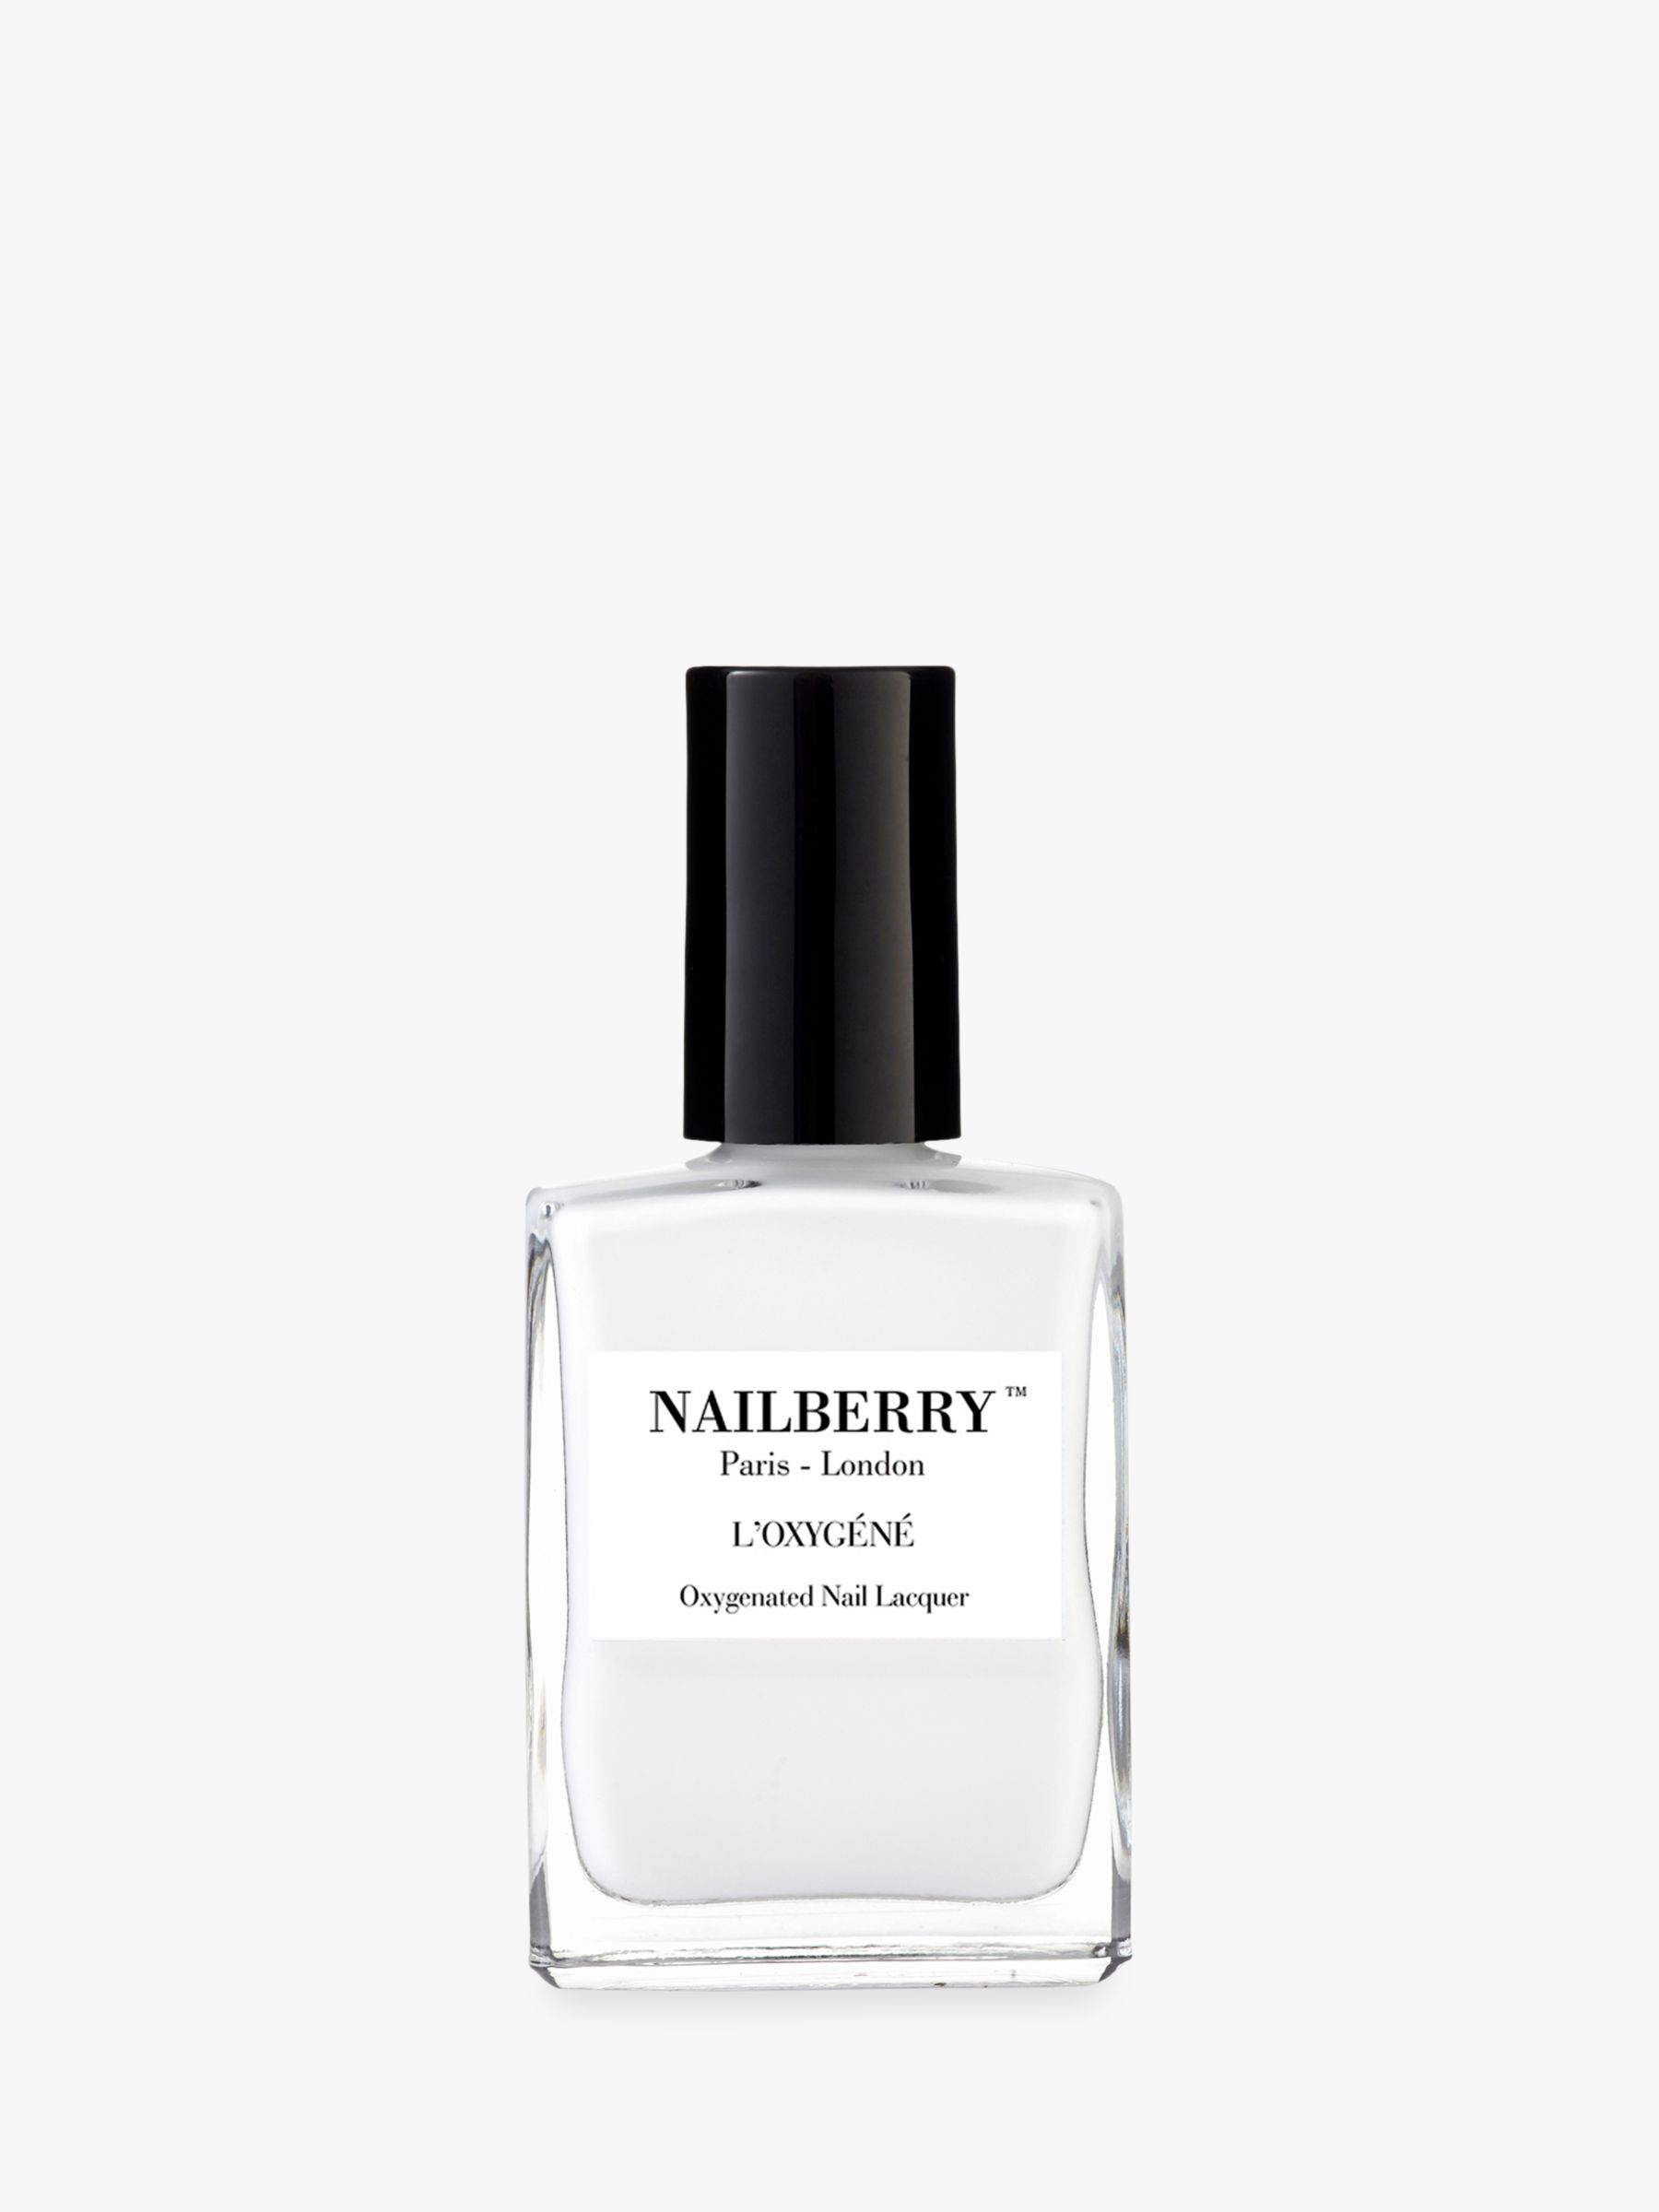 Nailberry L'Oxygéné Oxygenated Nail Lacquer, Flocon 1